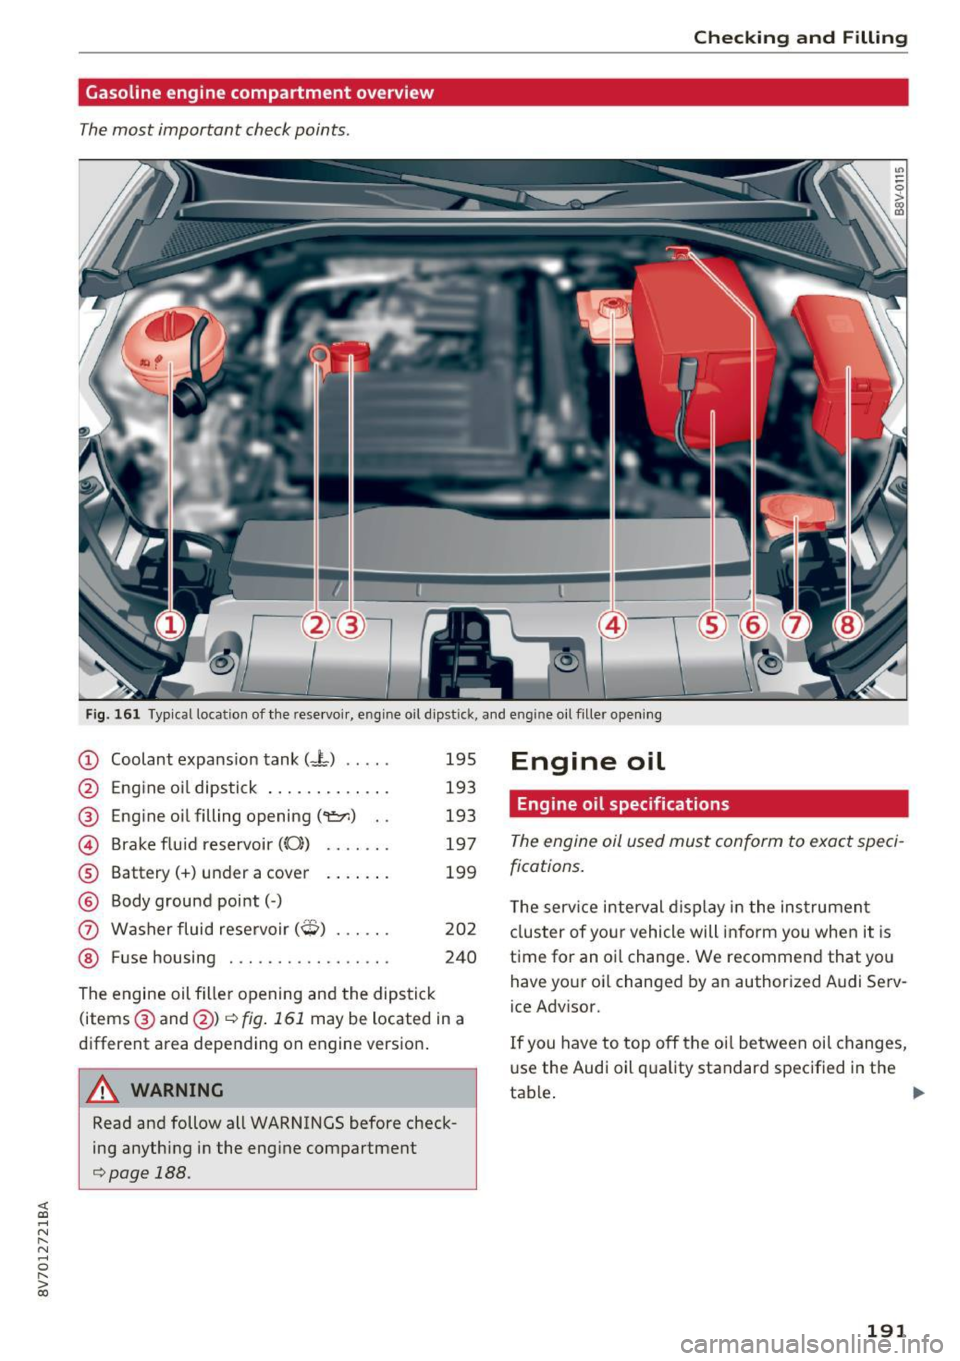 AUDI A3 CABRIOLET 2016  Owners Manual <( co ..... N 
" N ..... 0 r--. > 00 
Checking  and Filling 
Gasoline engine  compartment  overview 
The most  important  check points . 
Fig. 161 Typical  location of  the  rese rvoir , engine  oil d